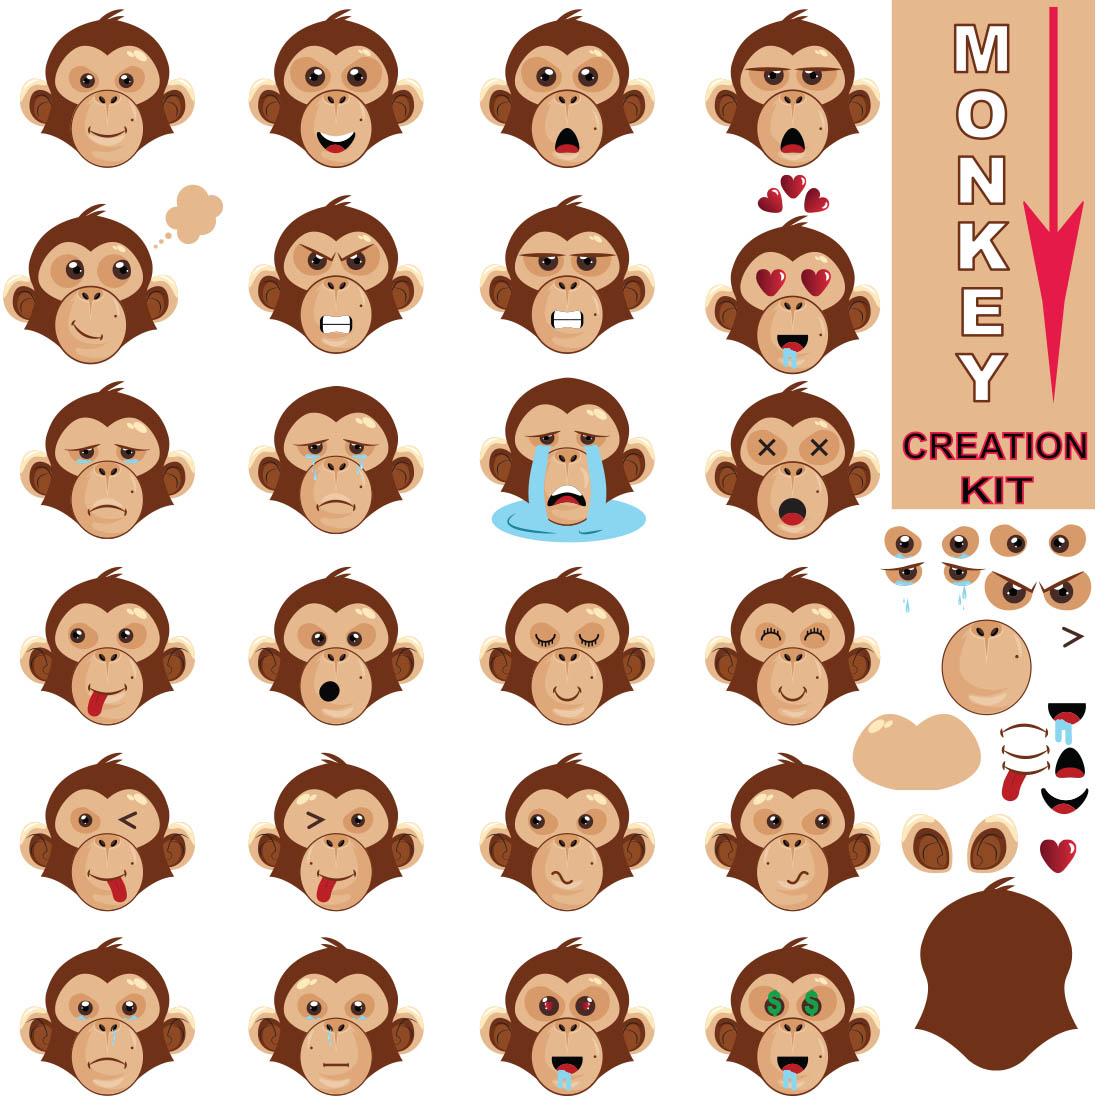 Set Collection of Different Monkey Face Emoji Expressions cover image.